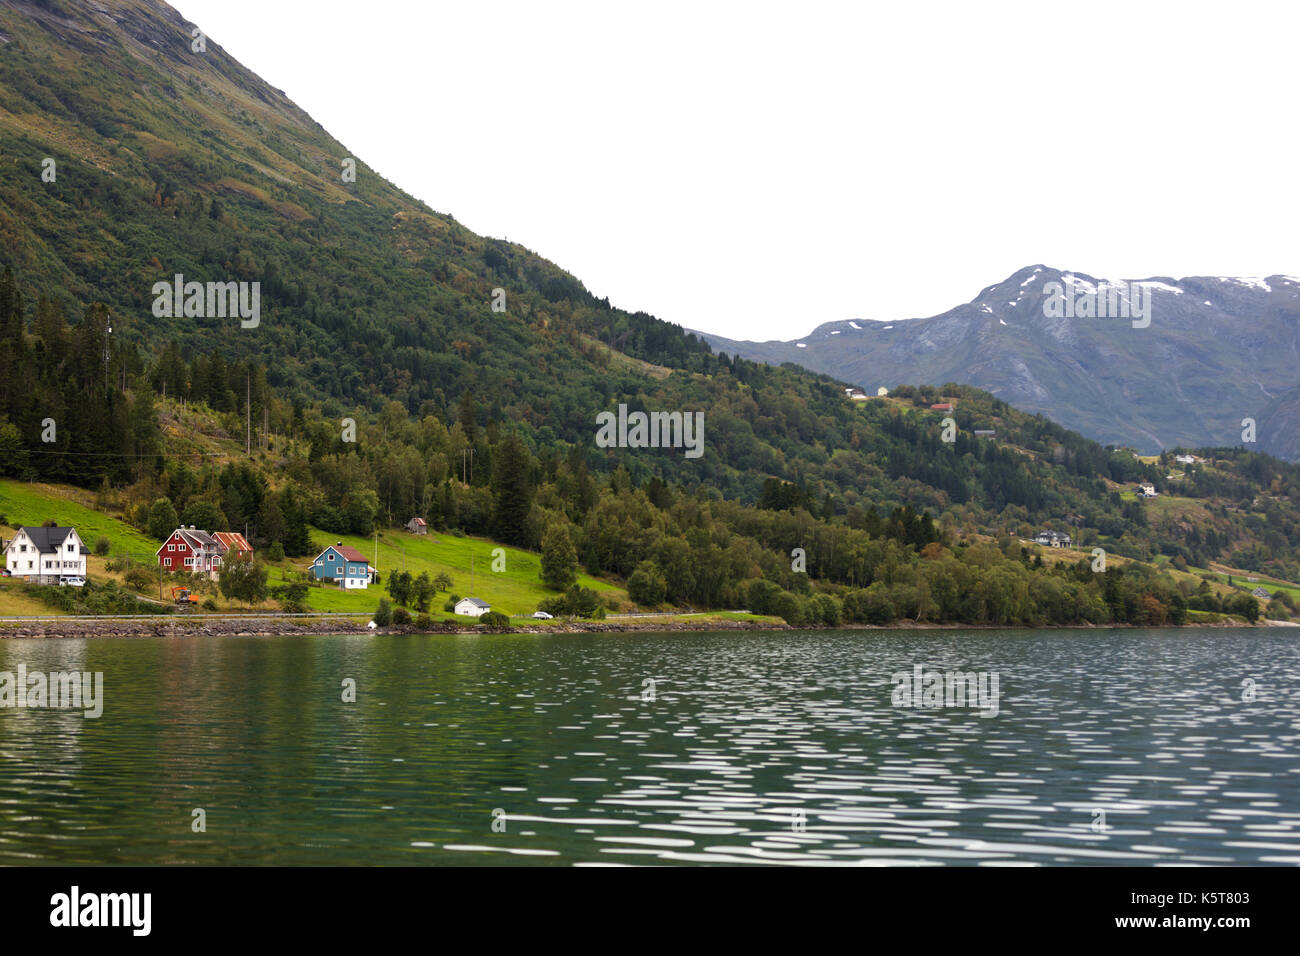 norwegian landscape at the foot of a lake with forest background and snowy mountains Stock Photo